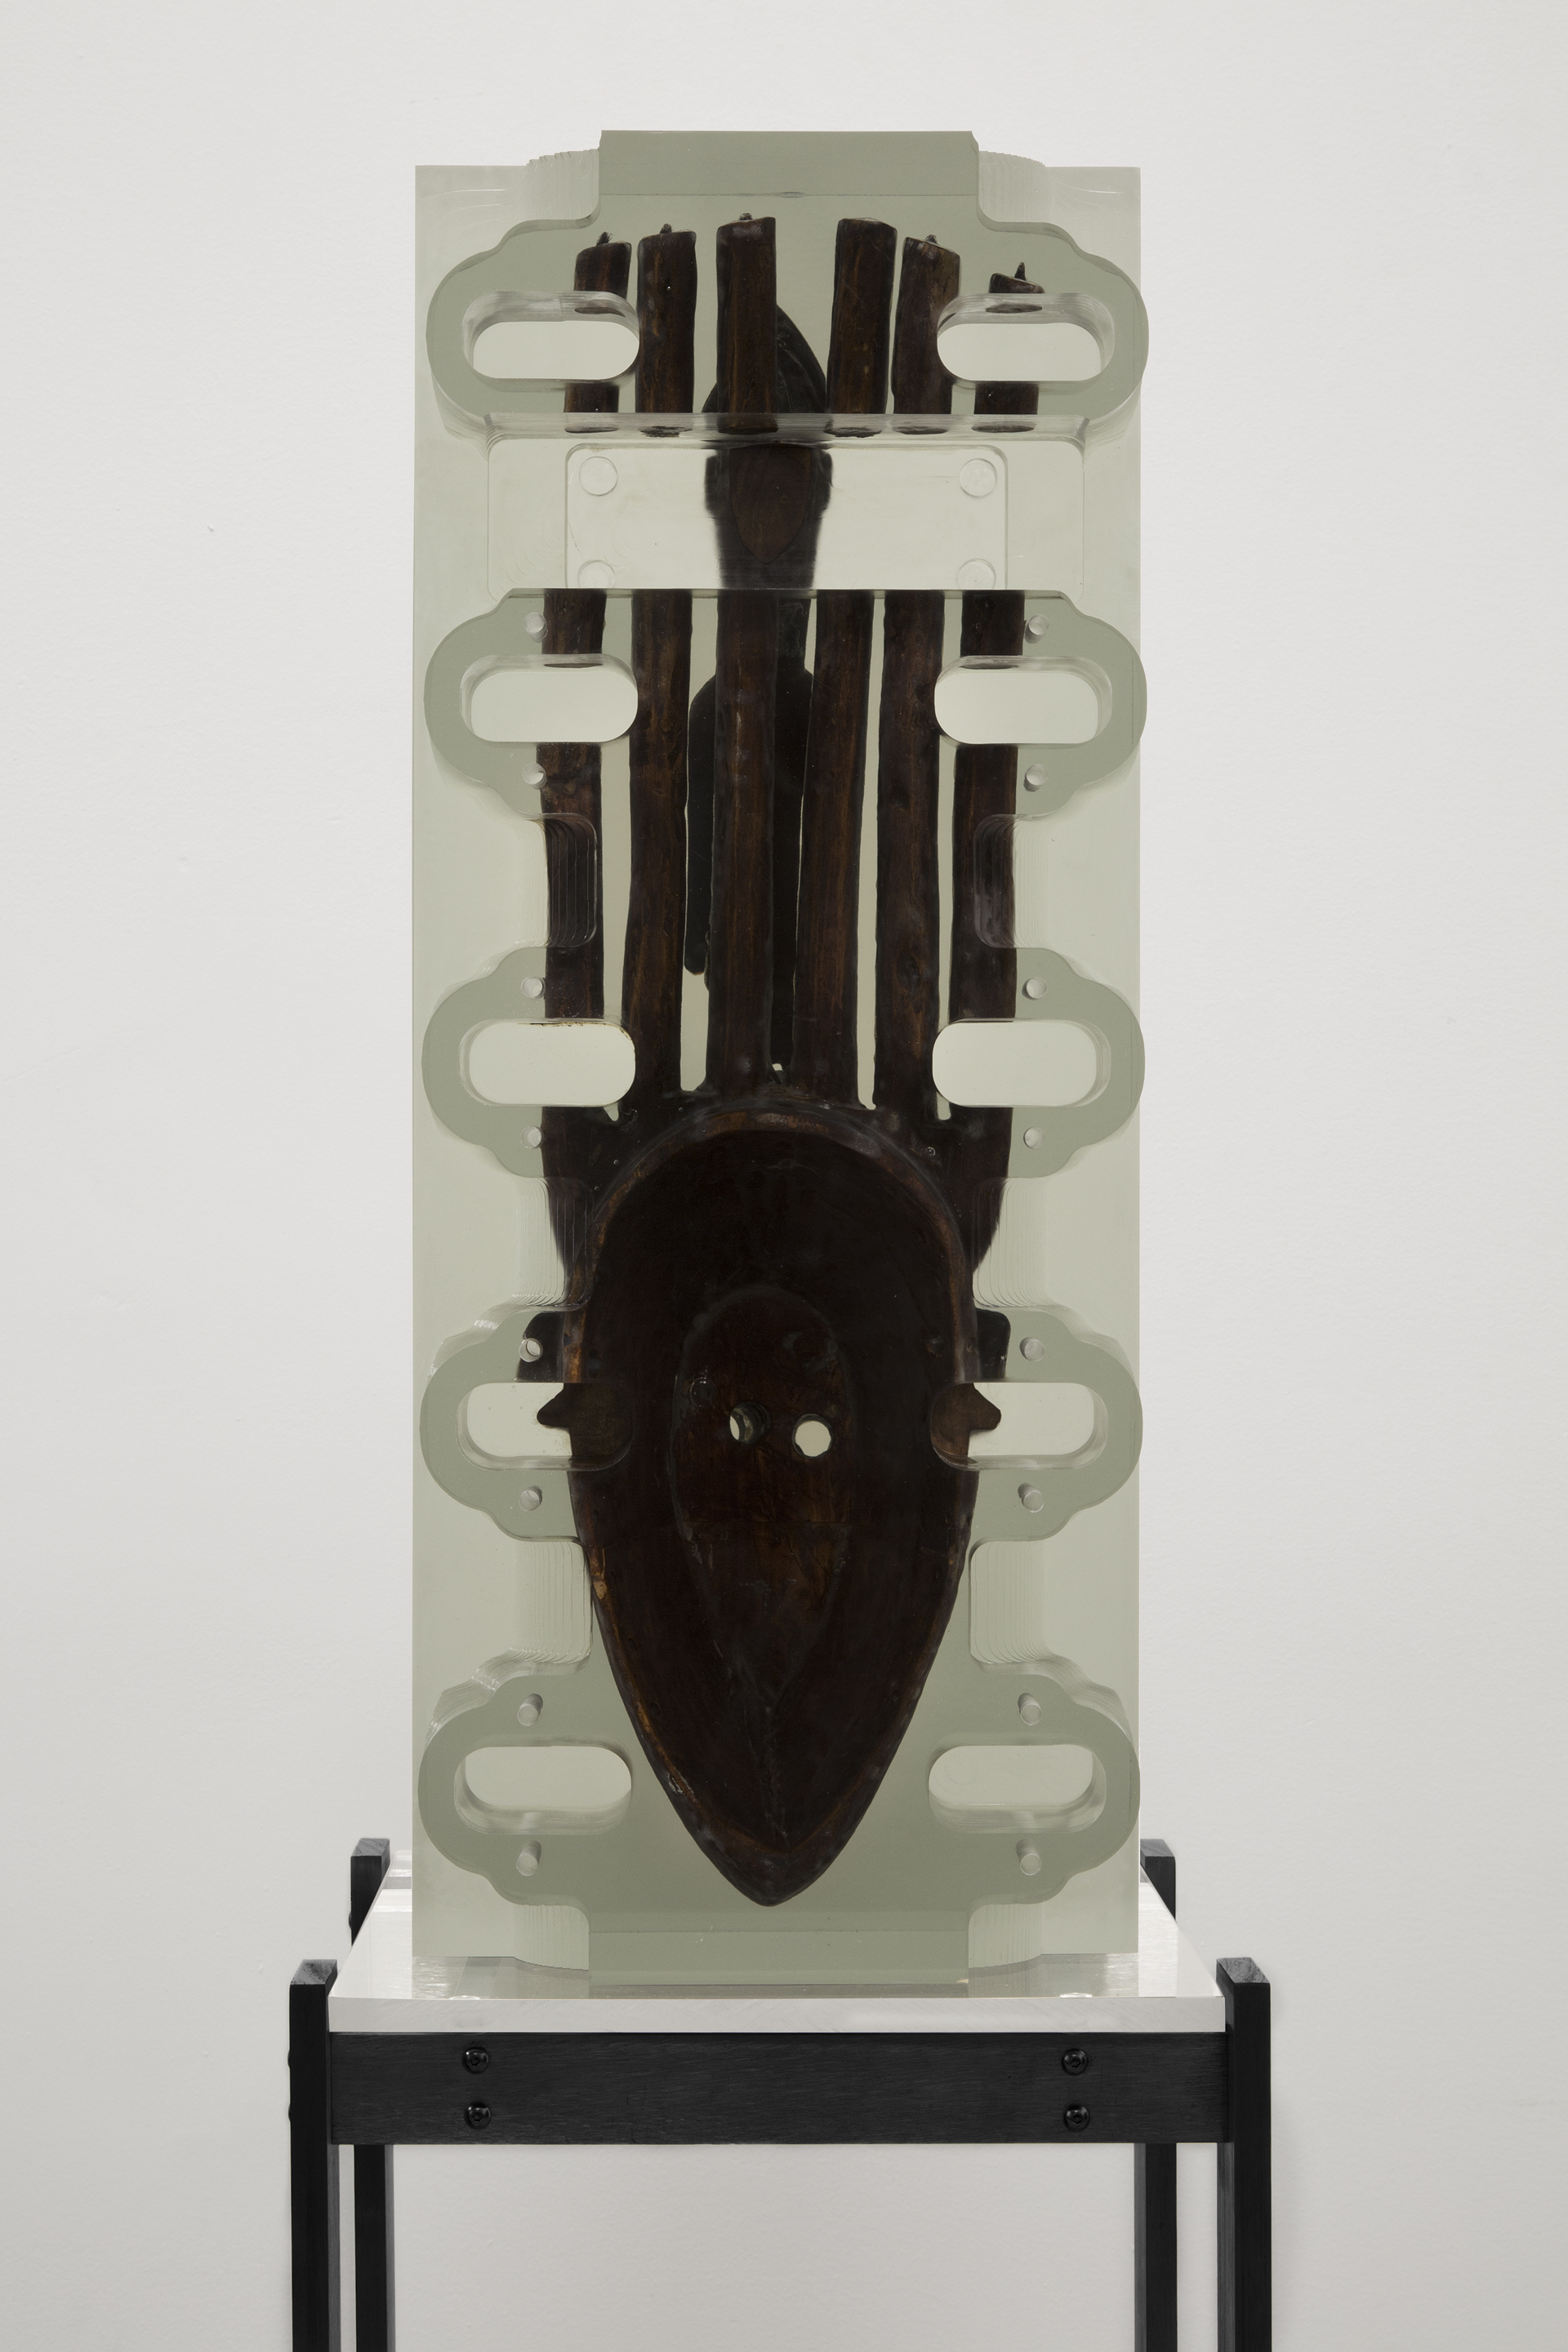  Matthew Angelo Harrison,  Dark Silhouette: Composition of Borrowed inlets #2 , 2018, Wooden sculpture from West Africa, polyurethane resin, anodized aluminum, acrylic, 60 1/2 x 23 x 16 3/4 inches 